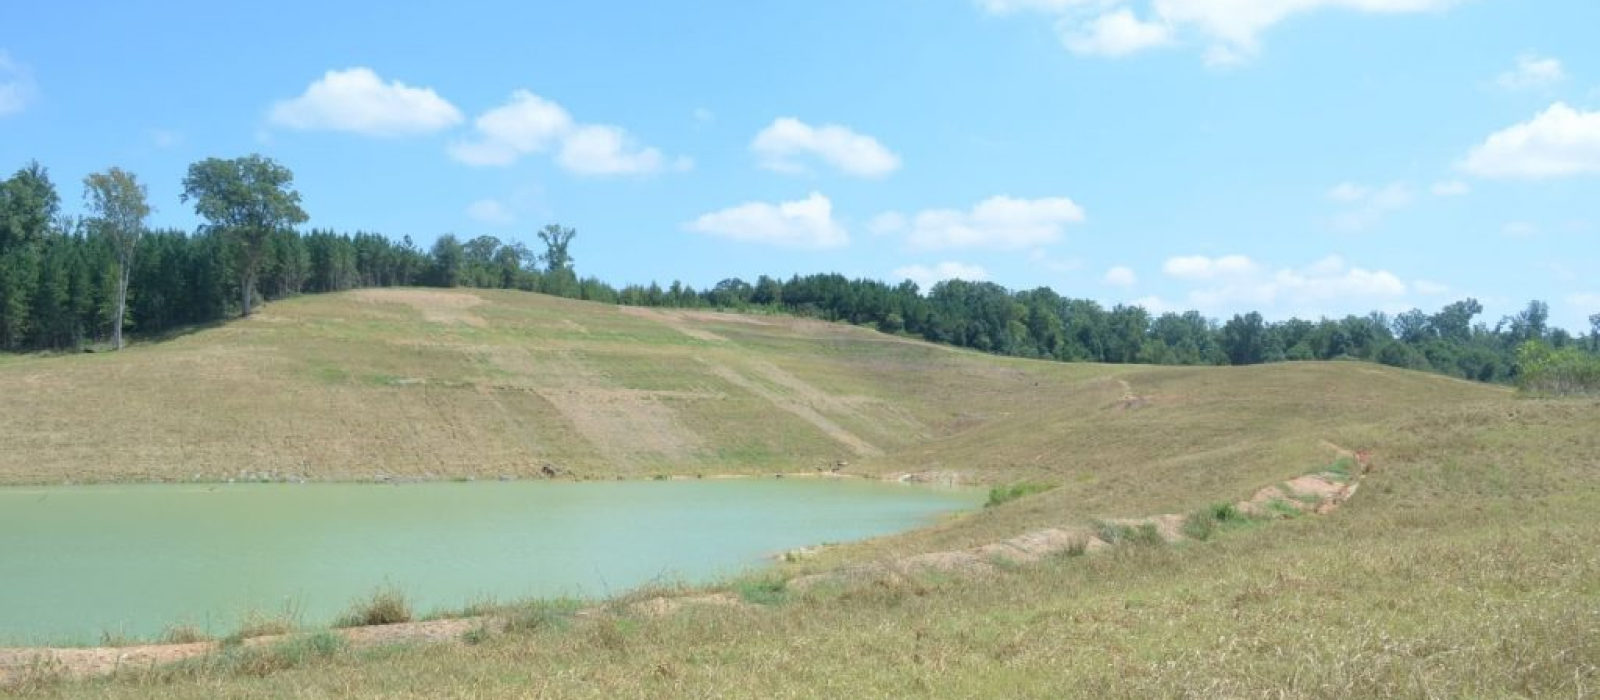 View Of Sims Mine Reclamation Project Site